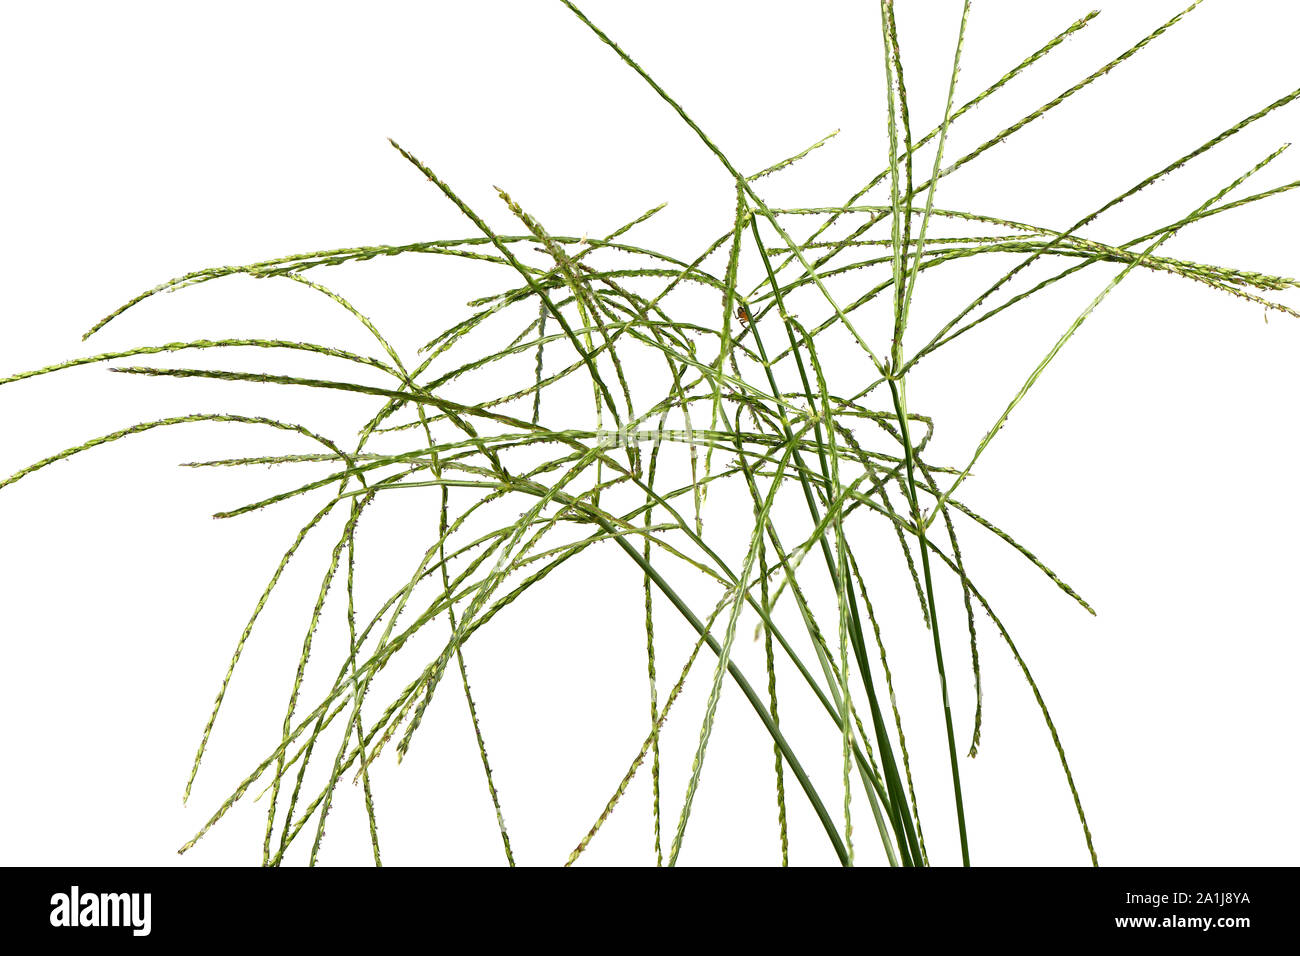 Digitaria sanguinalis isolated on white. There are many others names for D. eriantha, such as common finger grass, hairy crabgrass, crab finger grass, Stock Photo